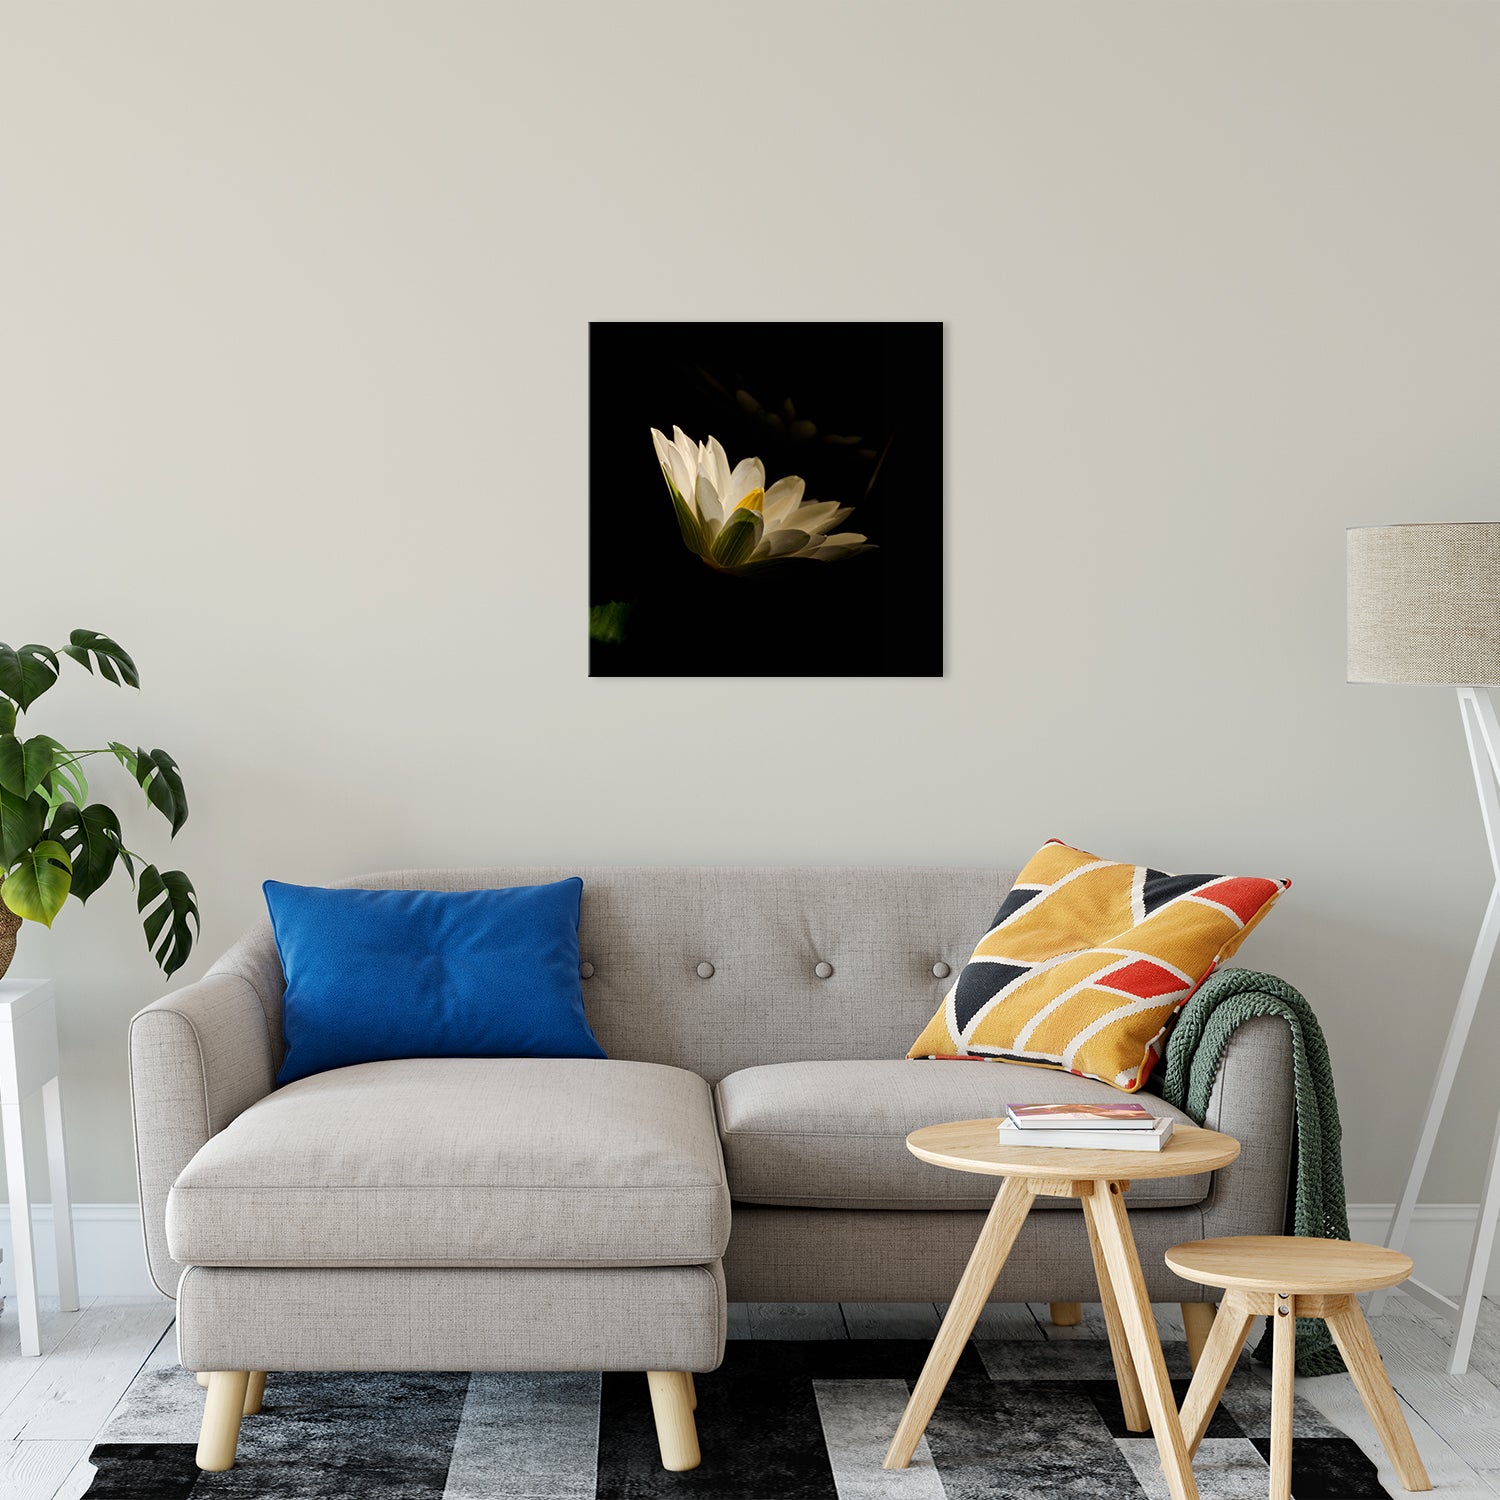 Spotlight on Waterlily - Square Nature / Floral Photo Fine Art & Unframed Wall Art Prints 24" x 24" / Fine Art Canvas - PIPAFINEART